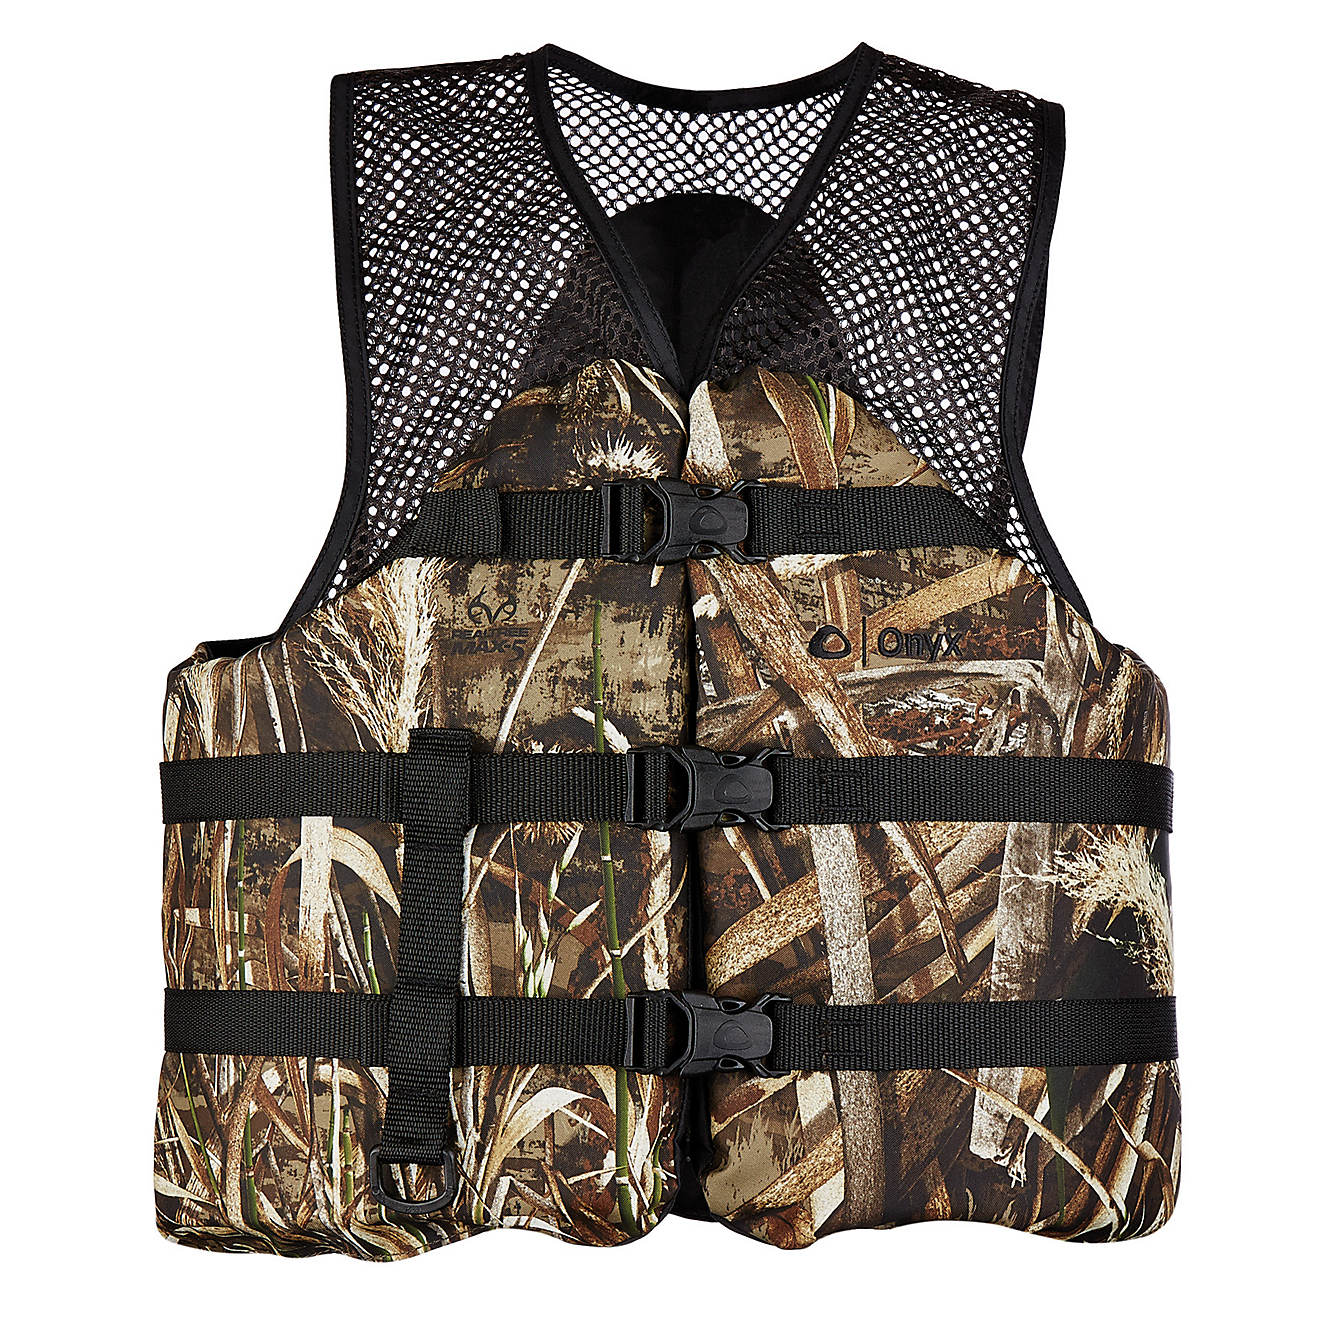 Onyx Outdoor Mesh Classic Sport Vest                                                                                             - view number 1